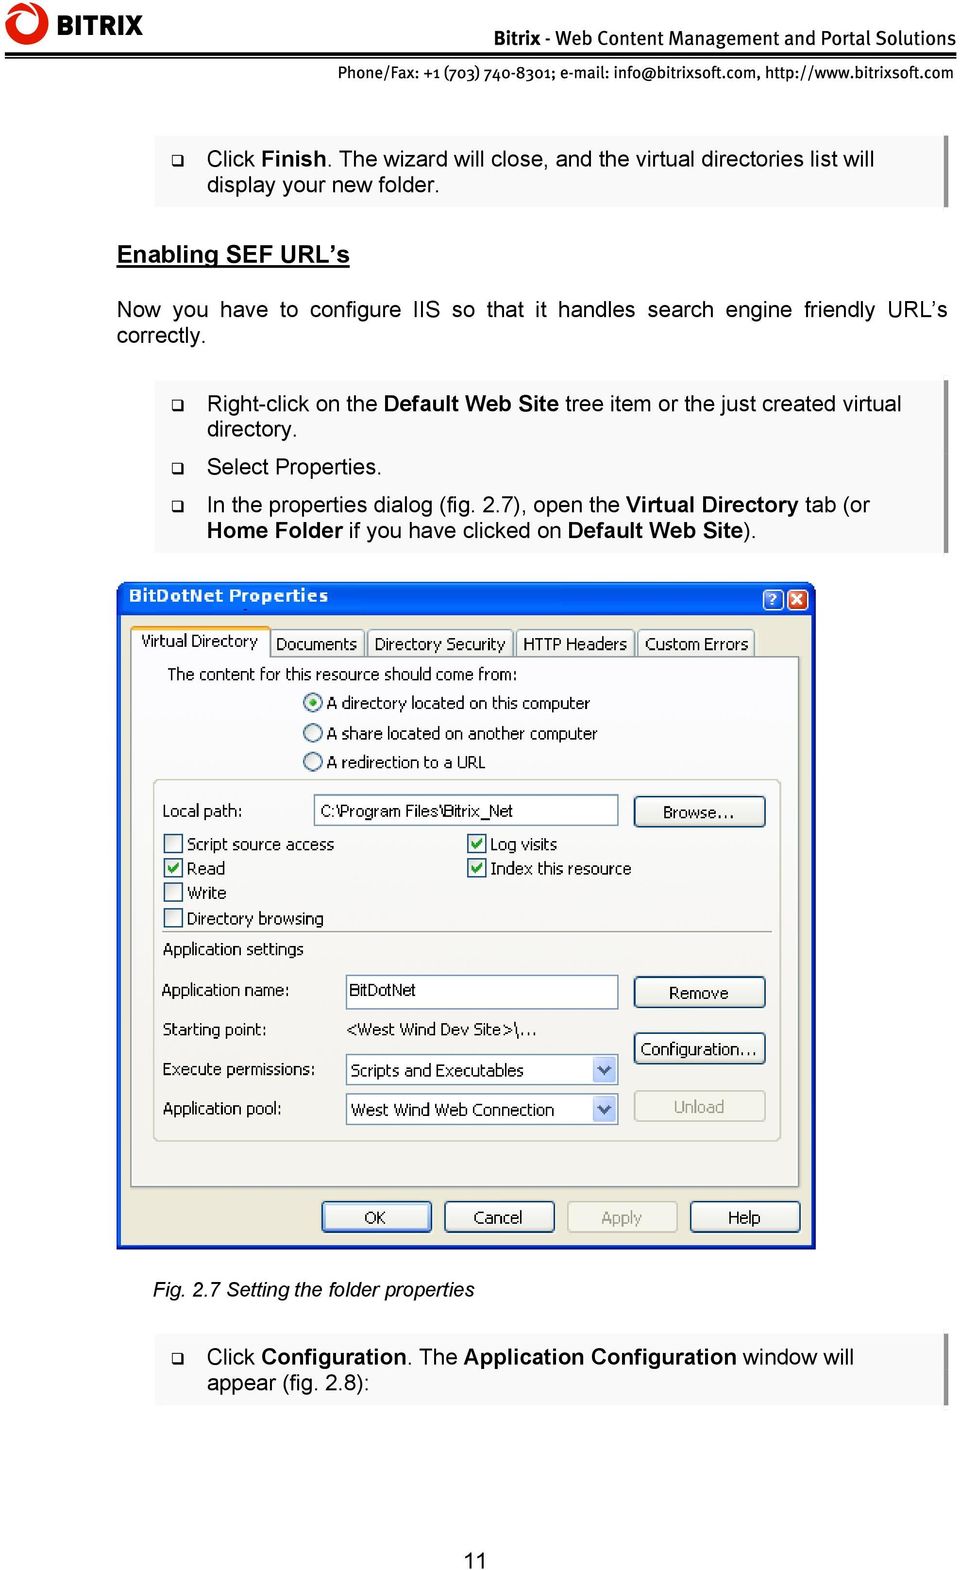 Right-click on the Default Web Site tree item or the just created virtual directory. Select Properties. In the properties dialog (fig. 2.